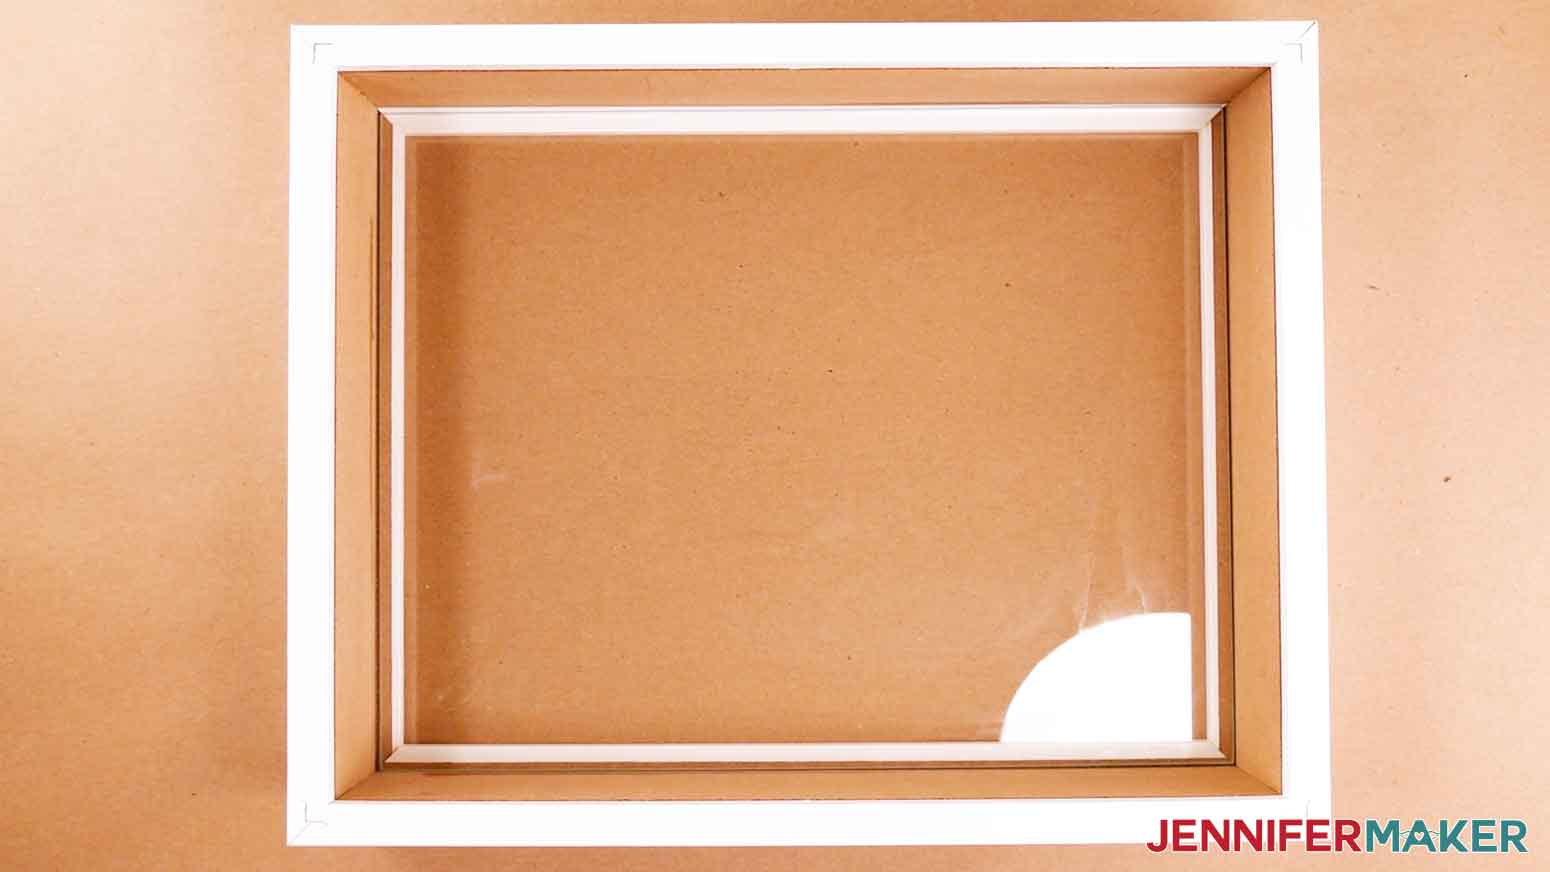 The purchased glass shadow box for the paper cut light box tutorial, showing the backing and inner wooden piece removed.